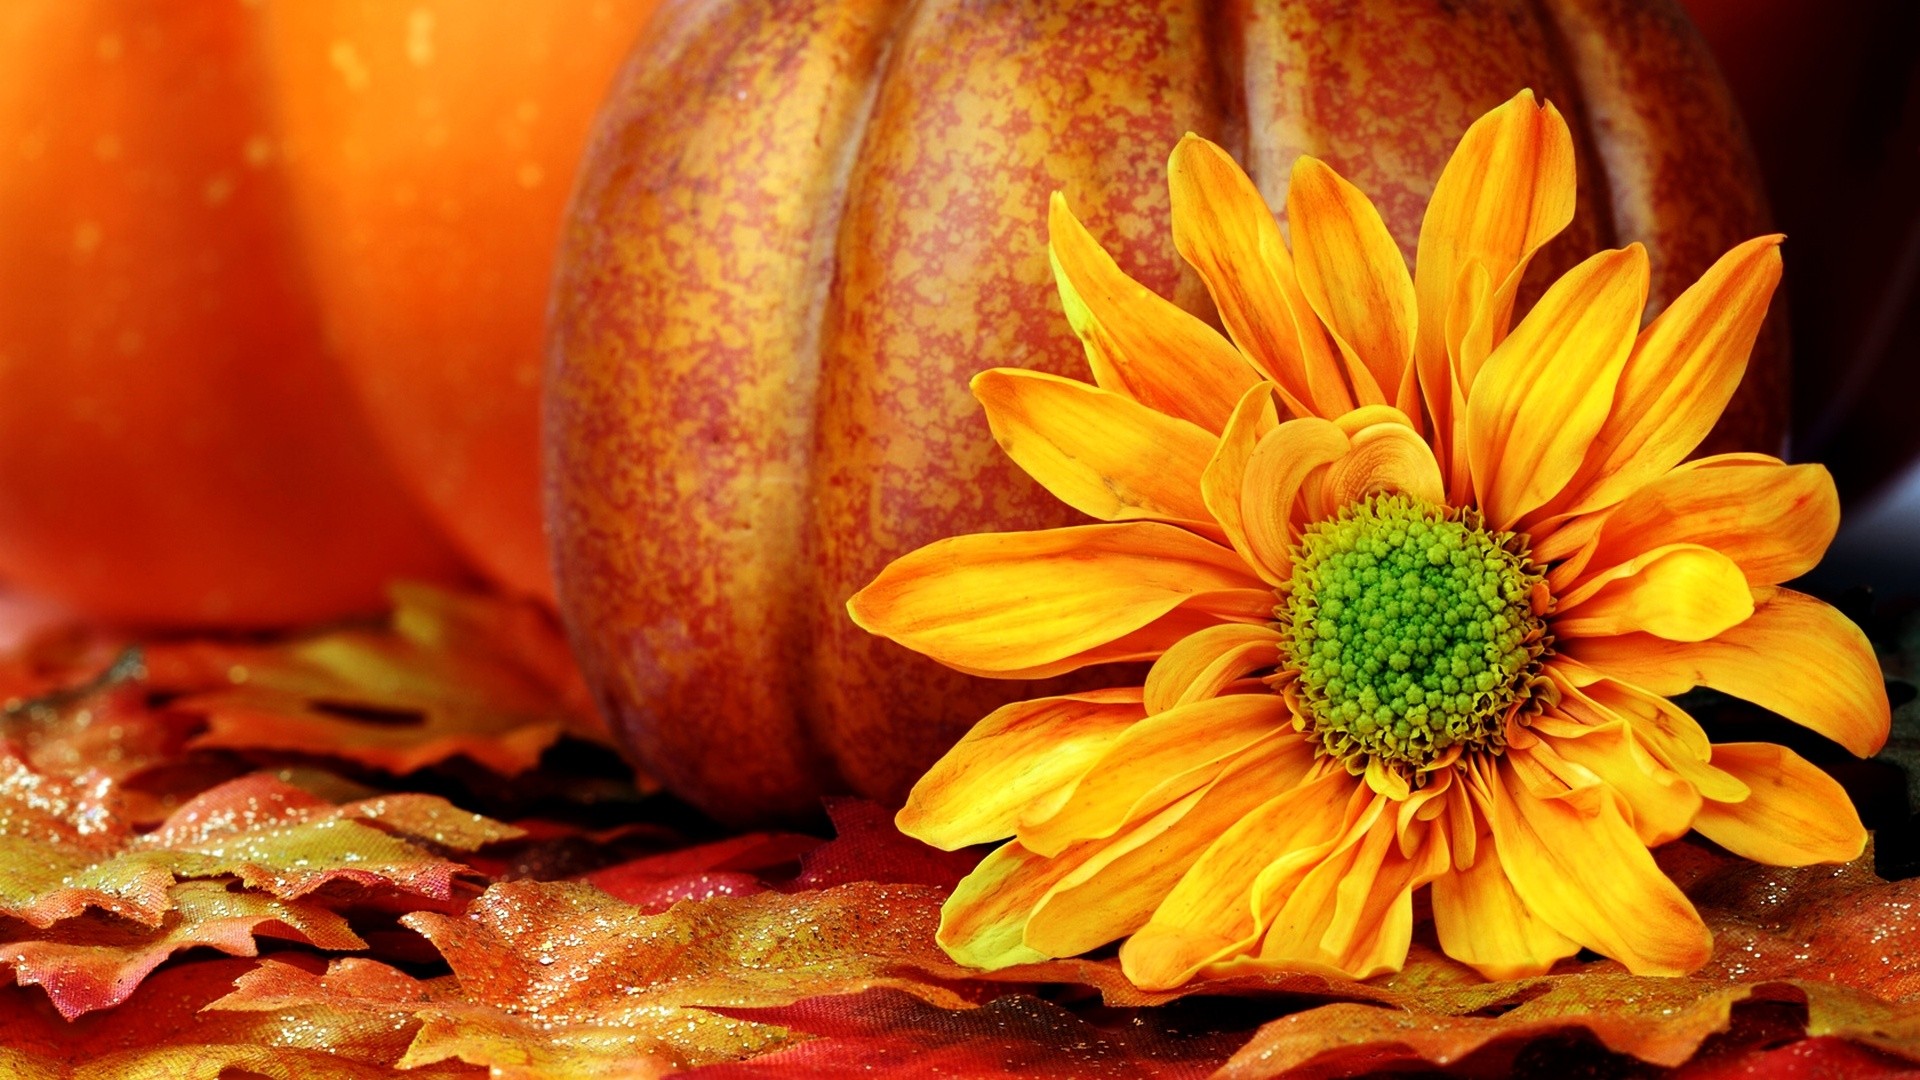 Autumn Pictures With Pumpkins For Desktop Wallpapers